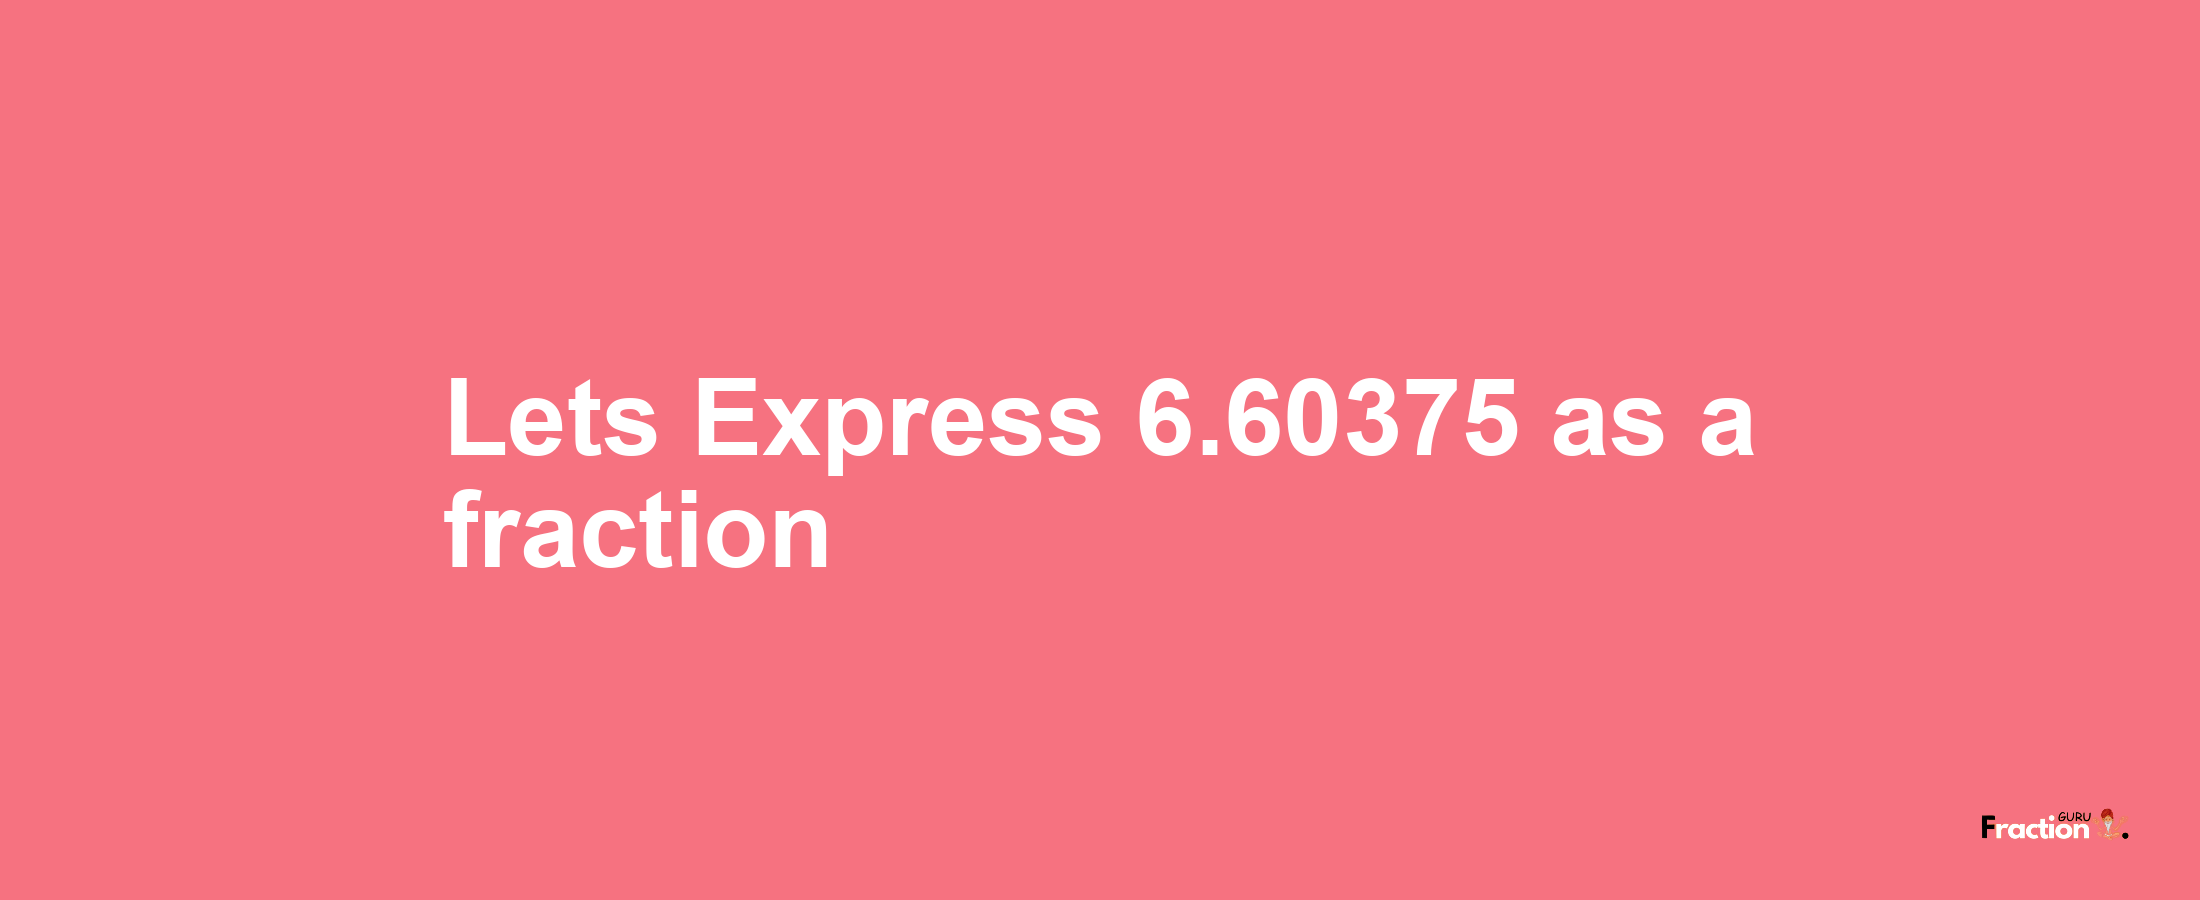 Lets Express 6.60375 as afraction